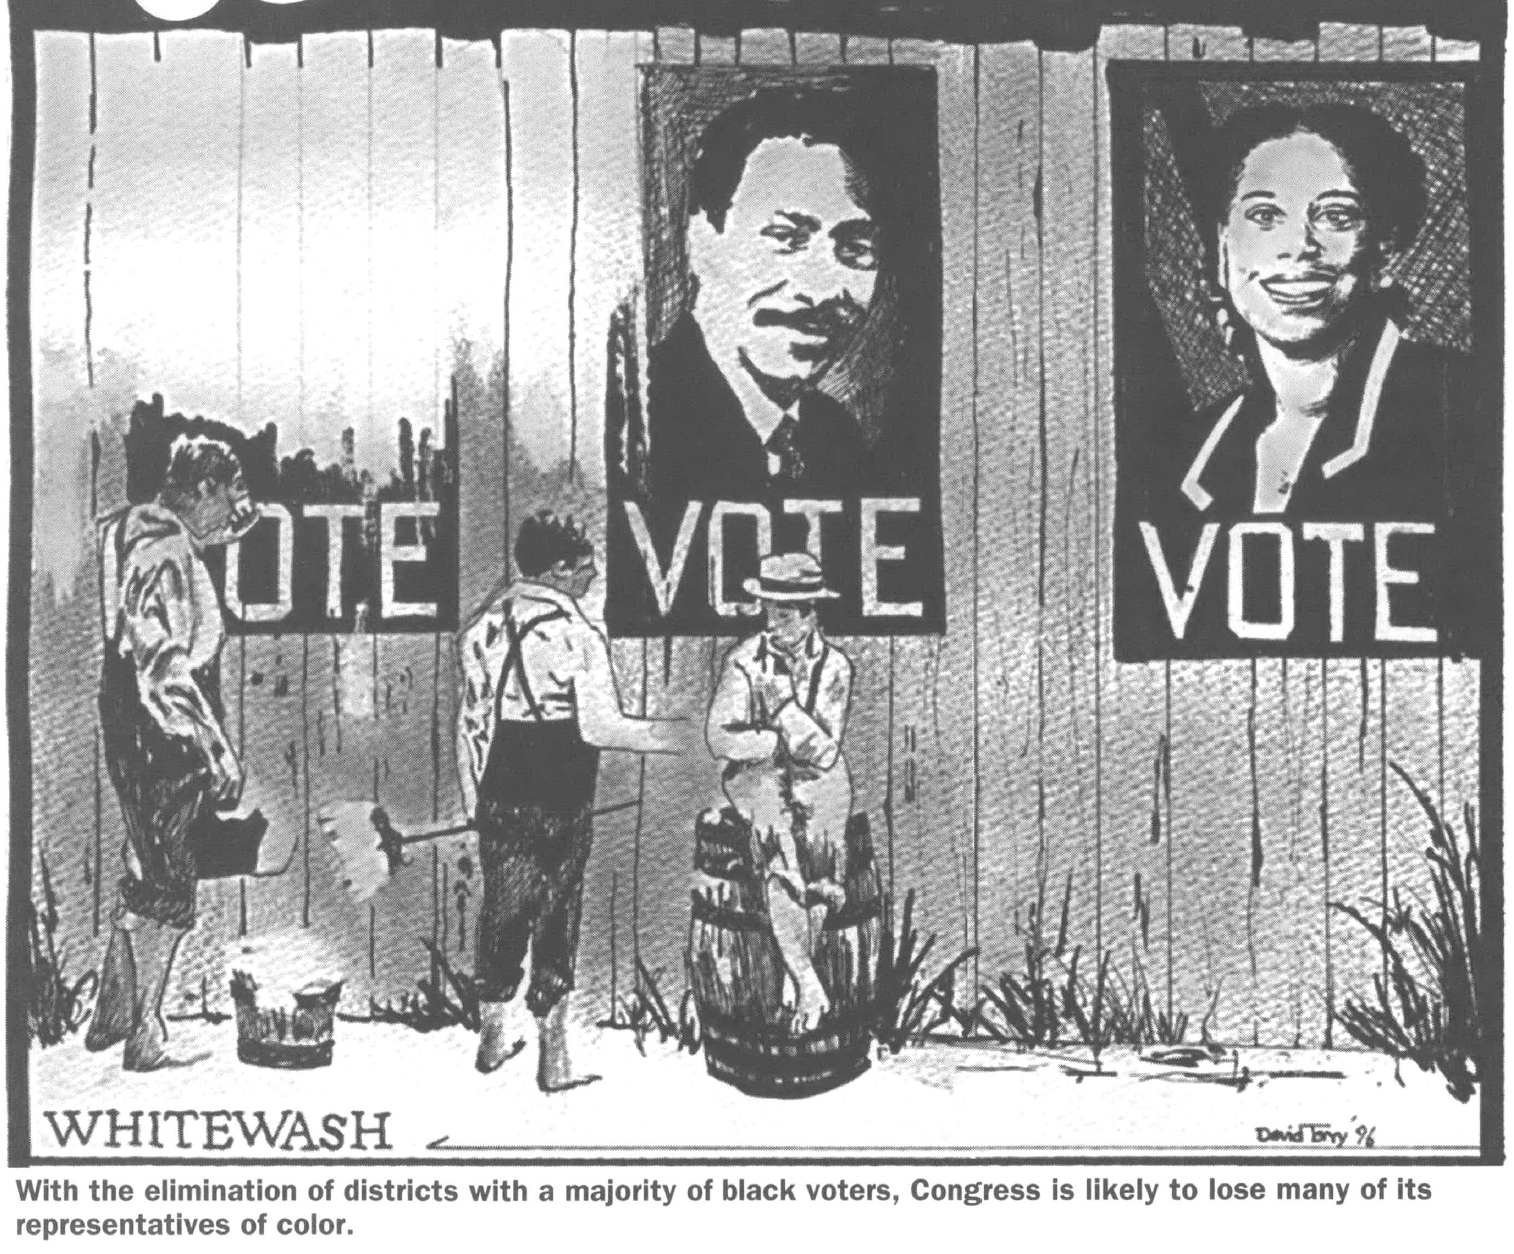 Drawing of people whitewashing fence over posters that read Vote